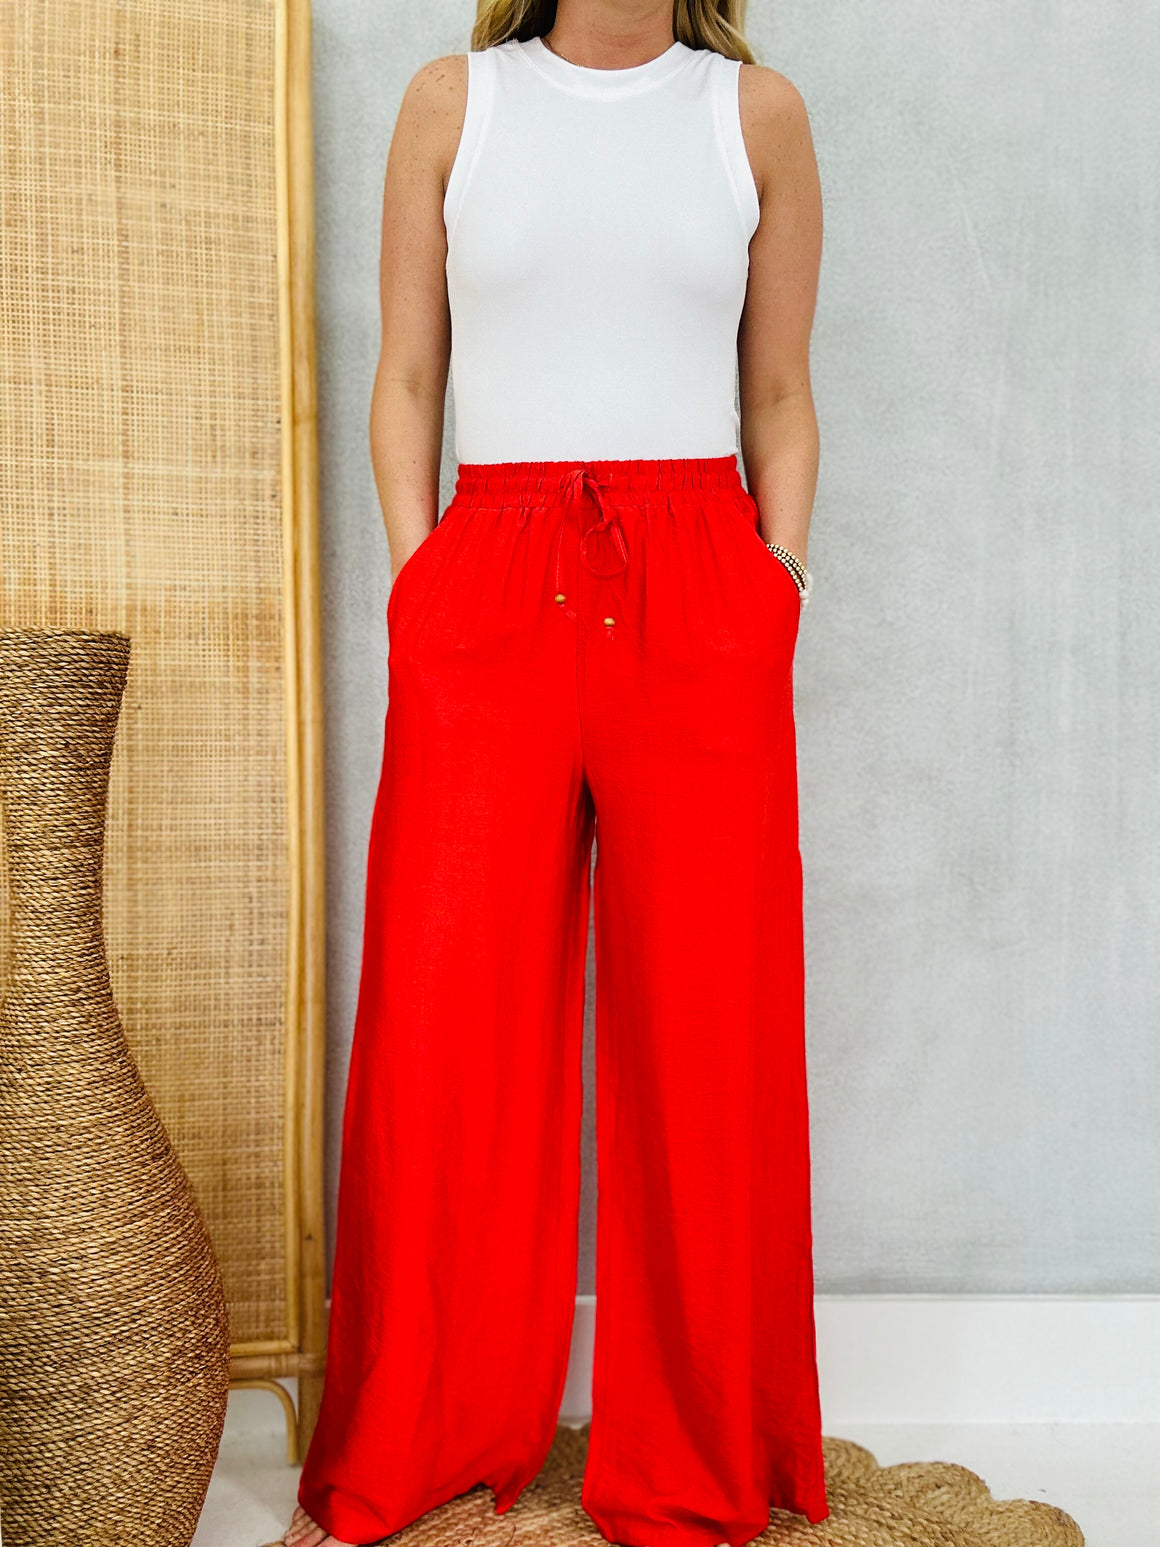 The Serenity Pants - Red